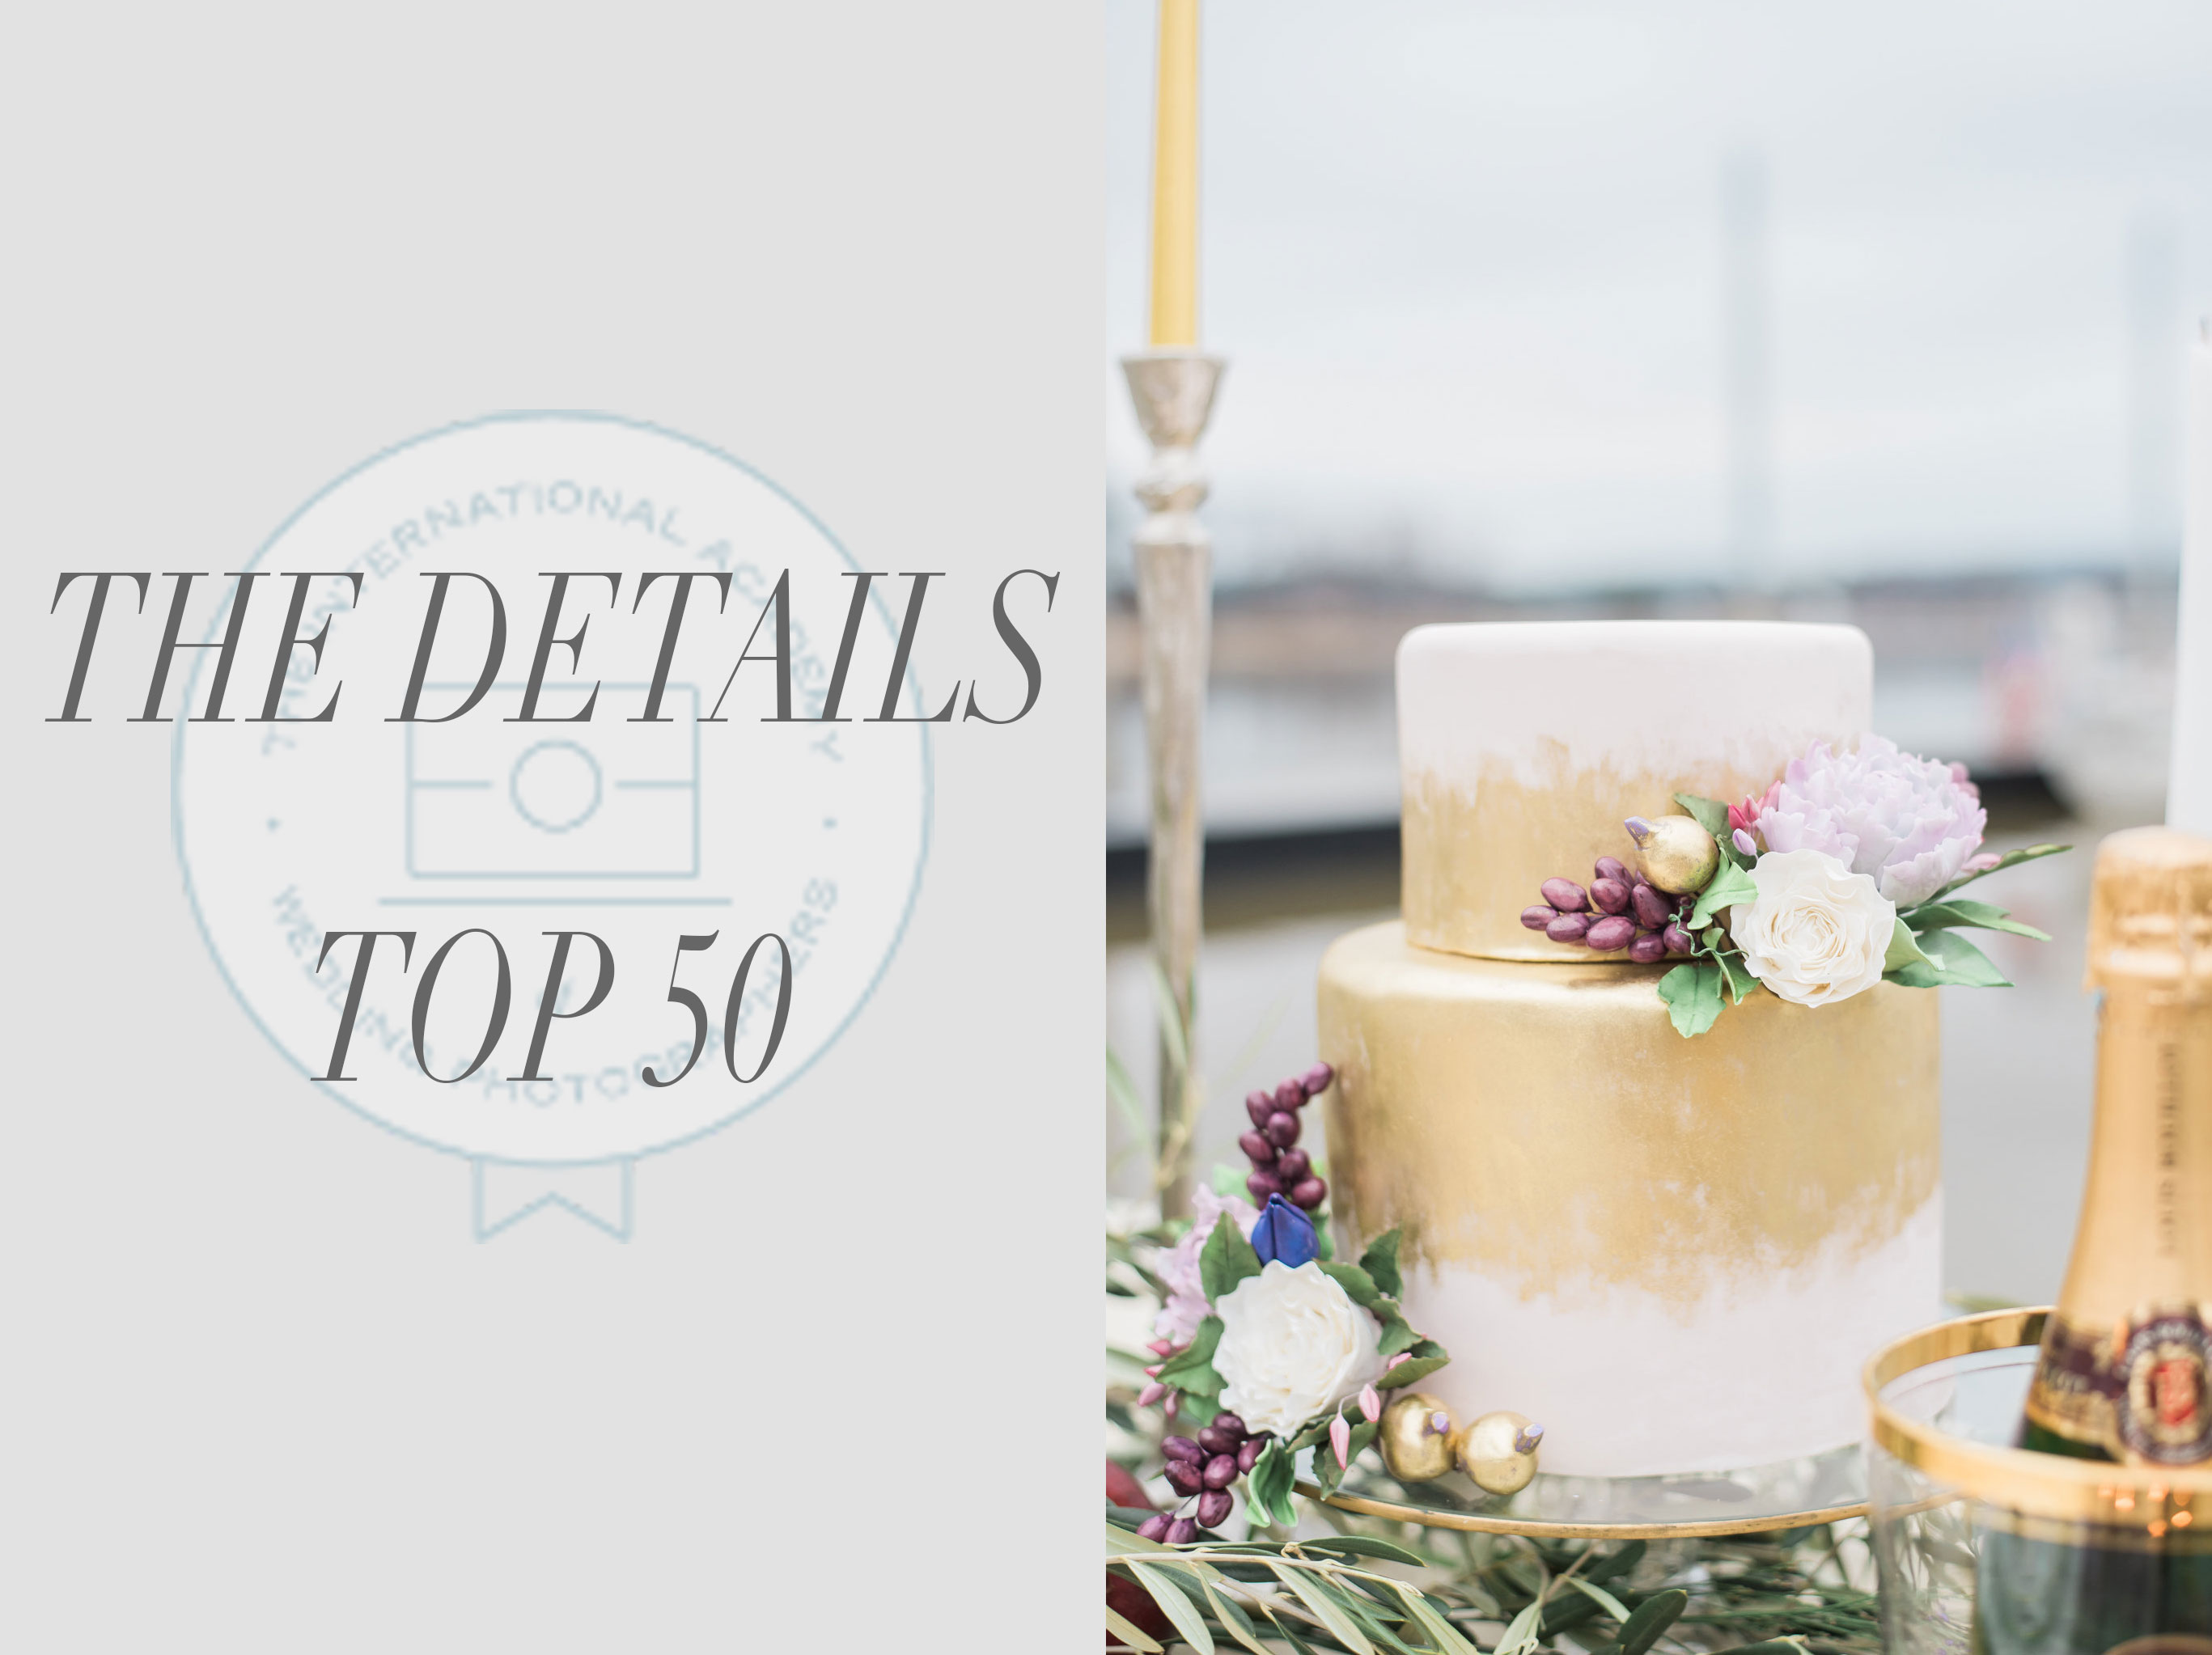 the-details-cake-top-50.jpg